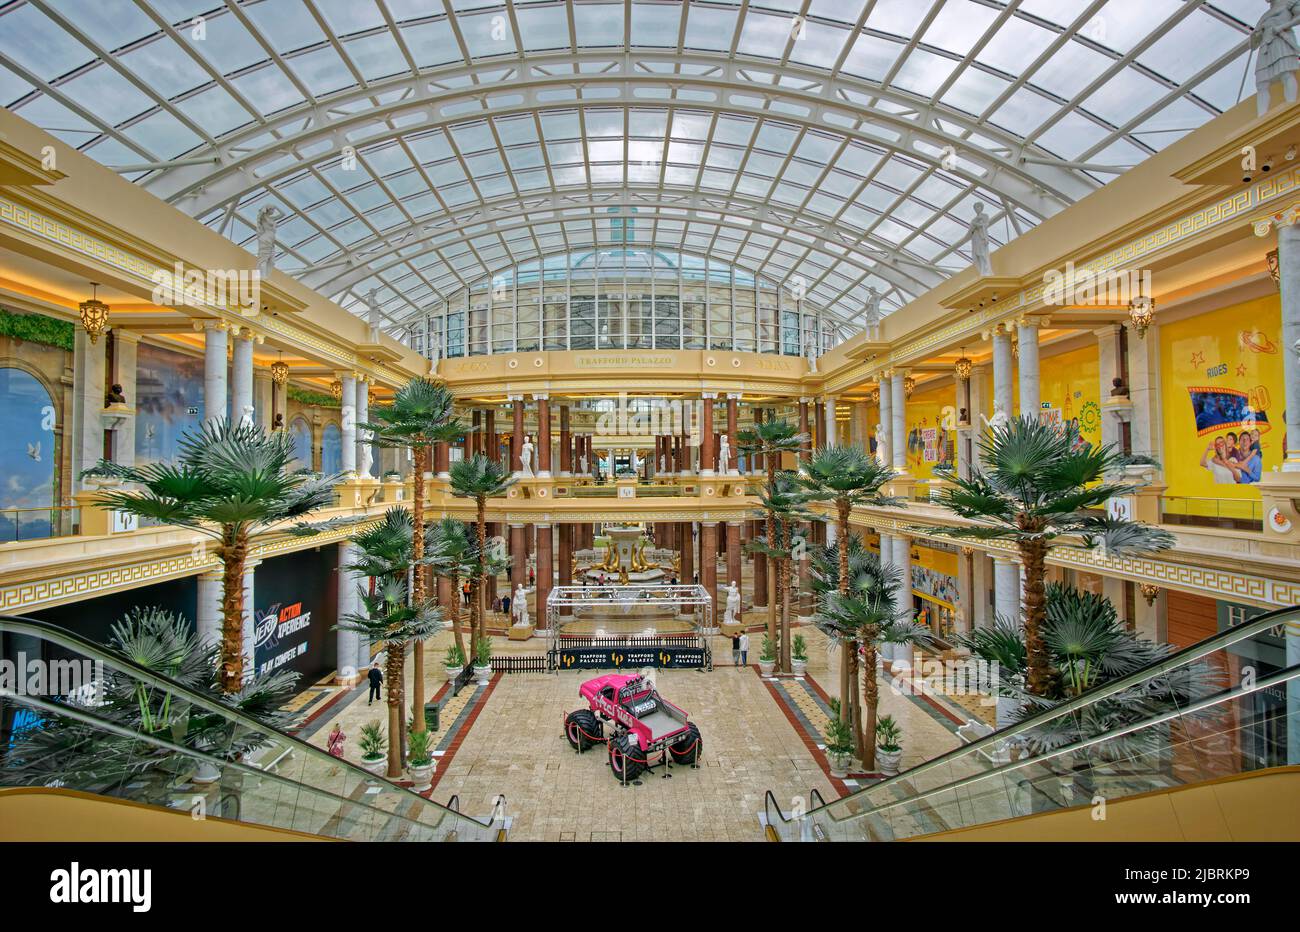 Trafford Palazzo at the Trafford Centre Malls, Greater Manchester in England. Stock Photo